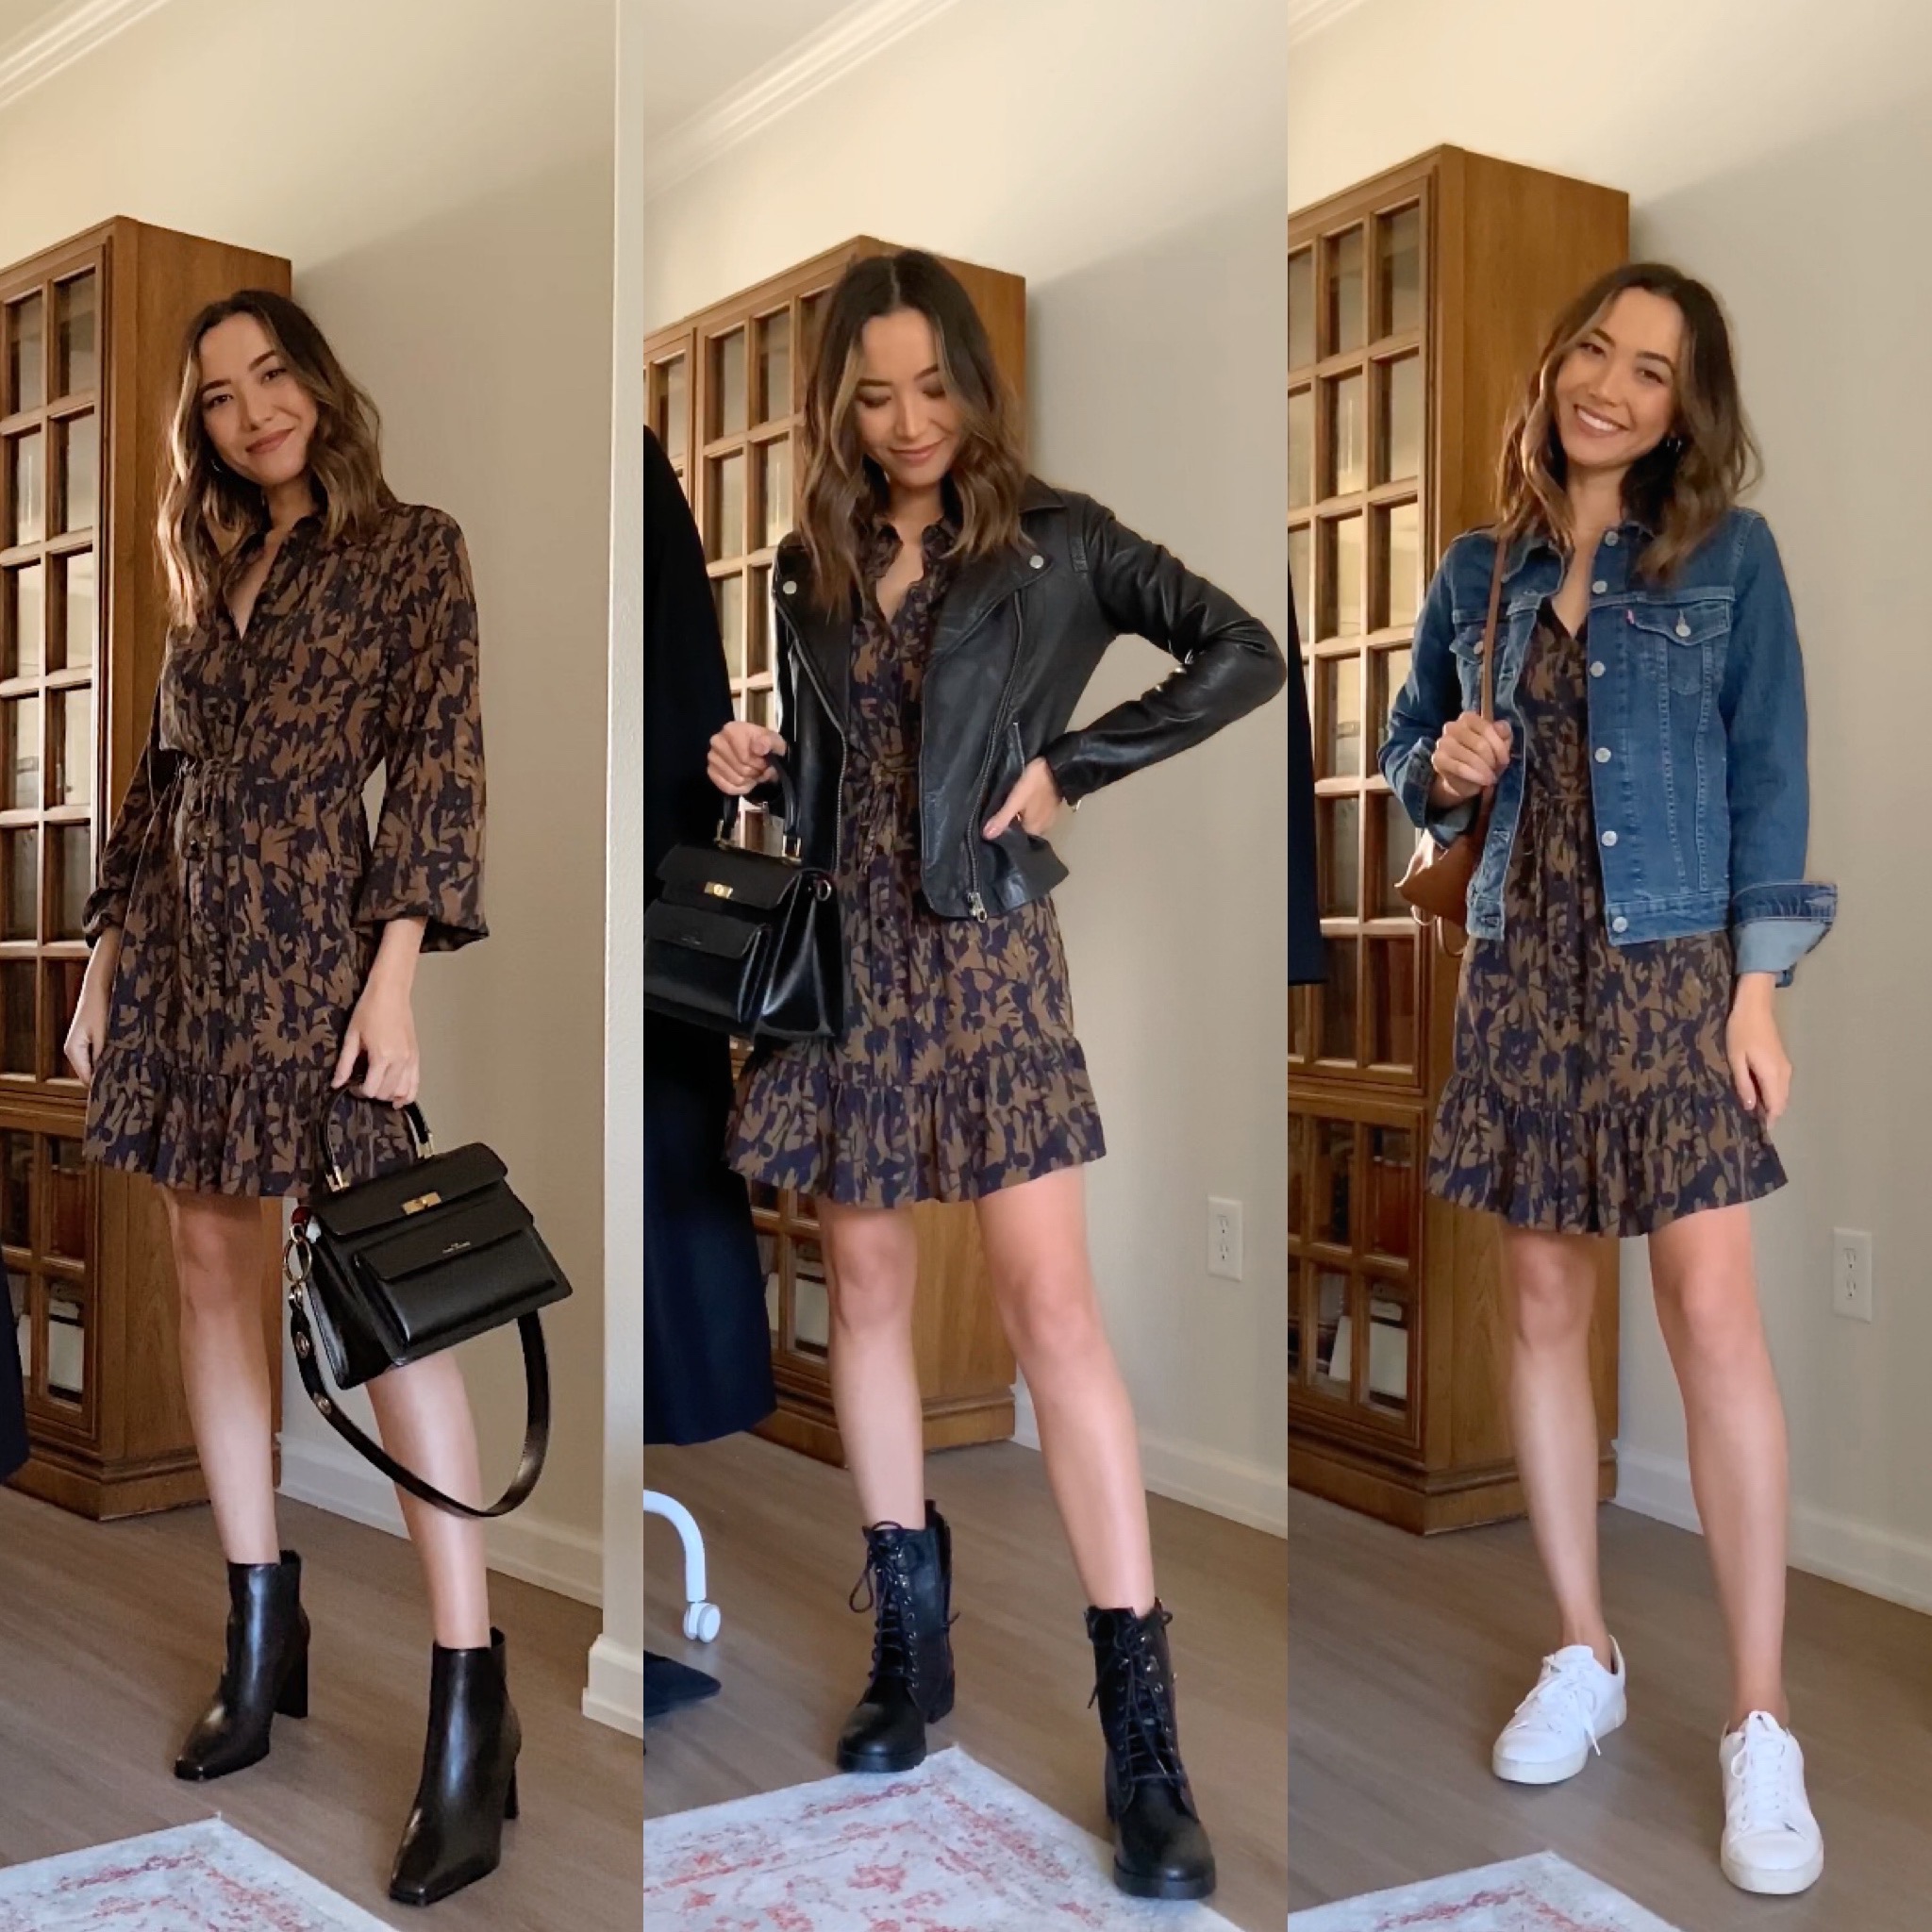 How to Wear a Floral Dress in 3 Steps